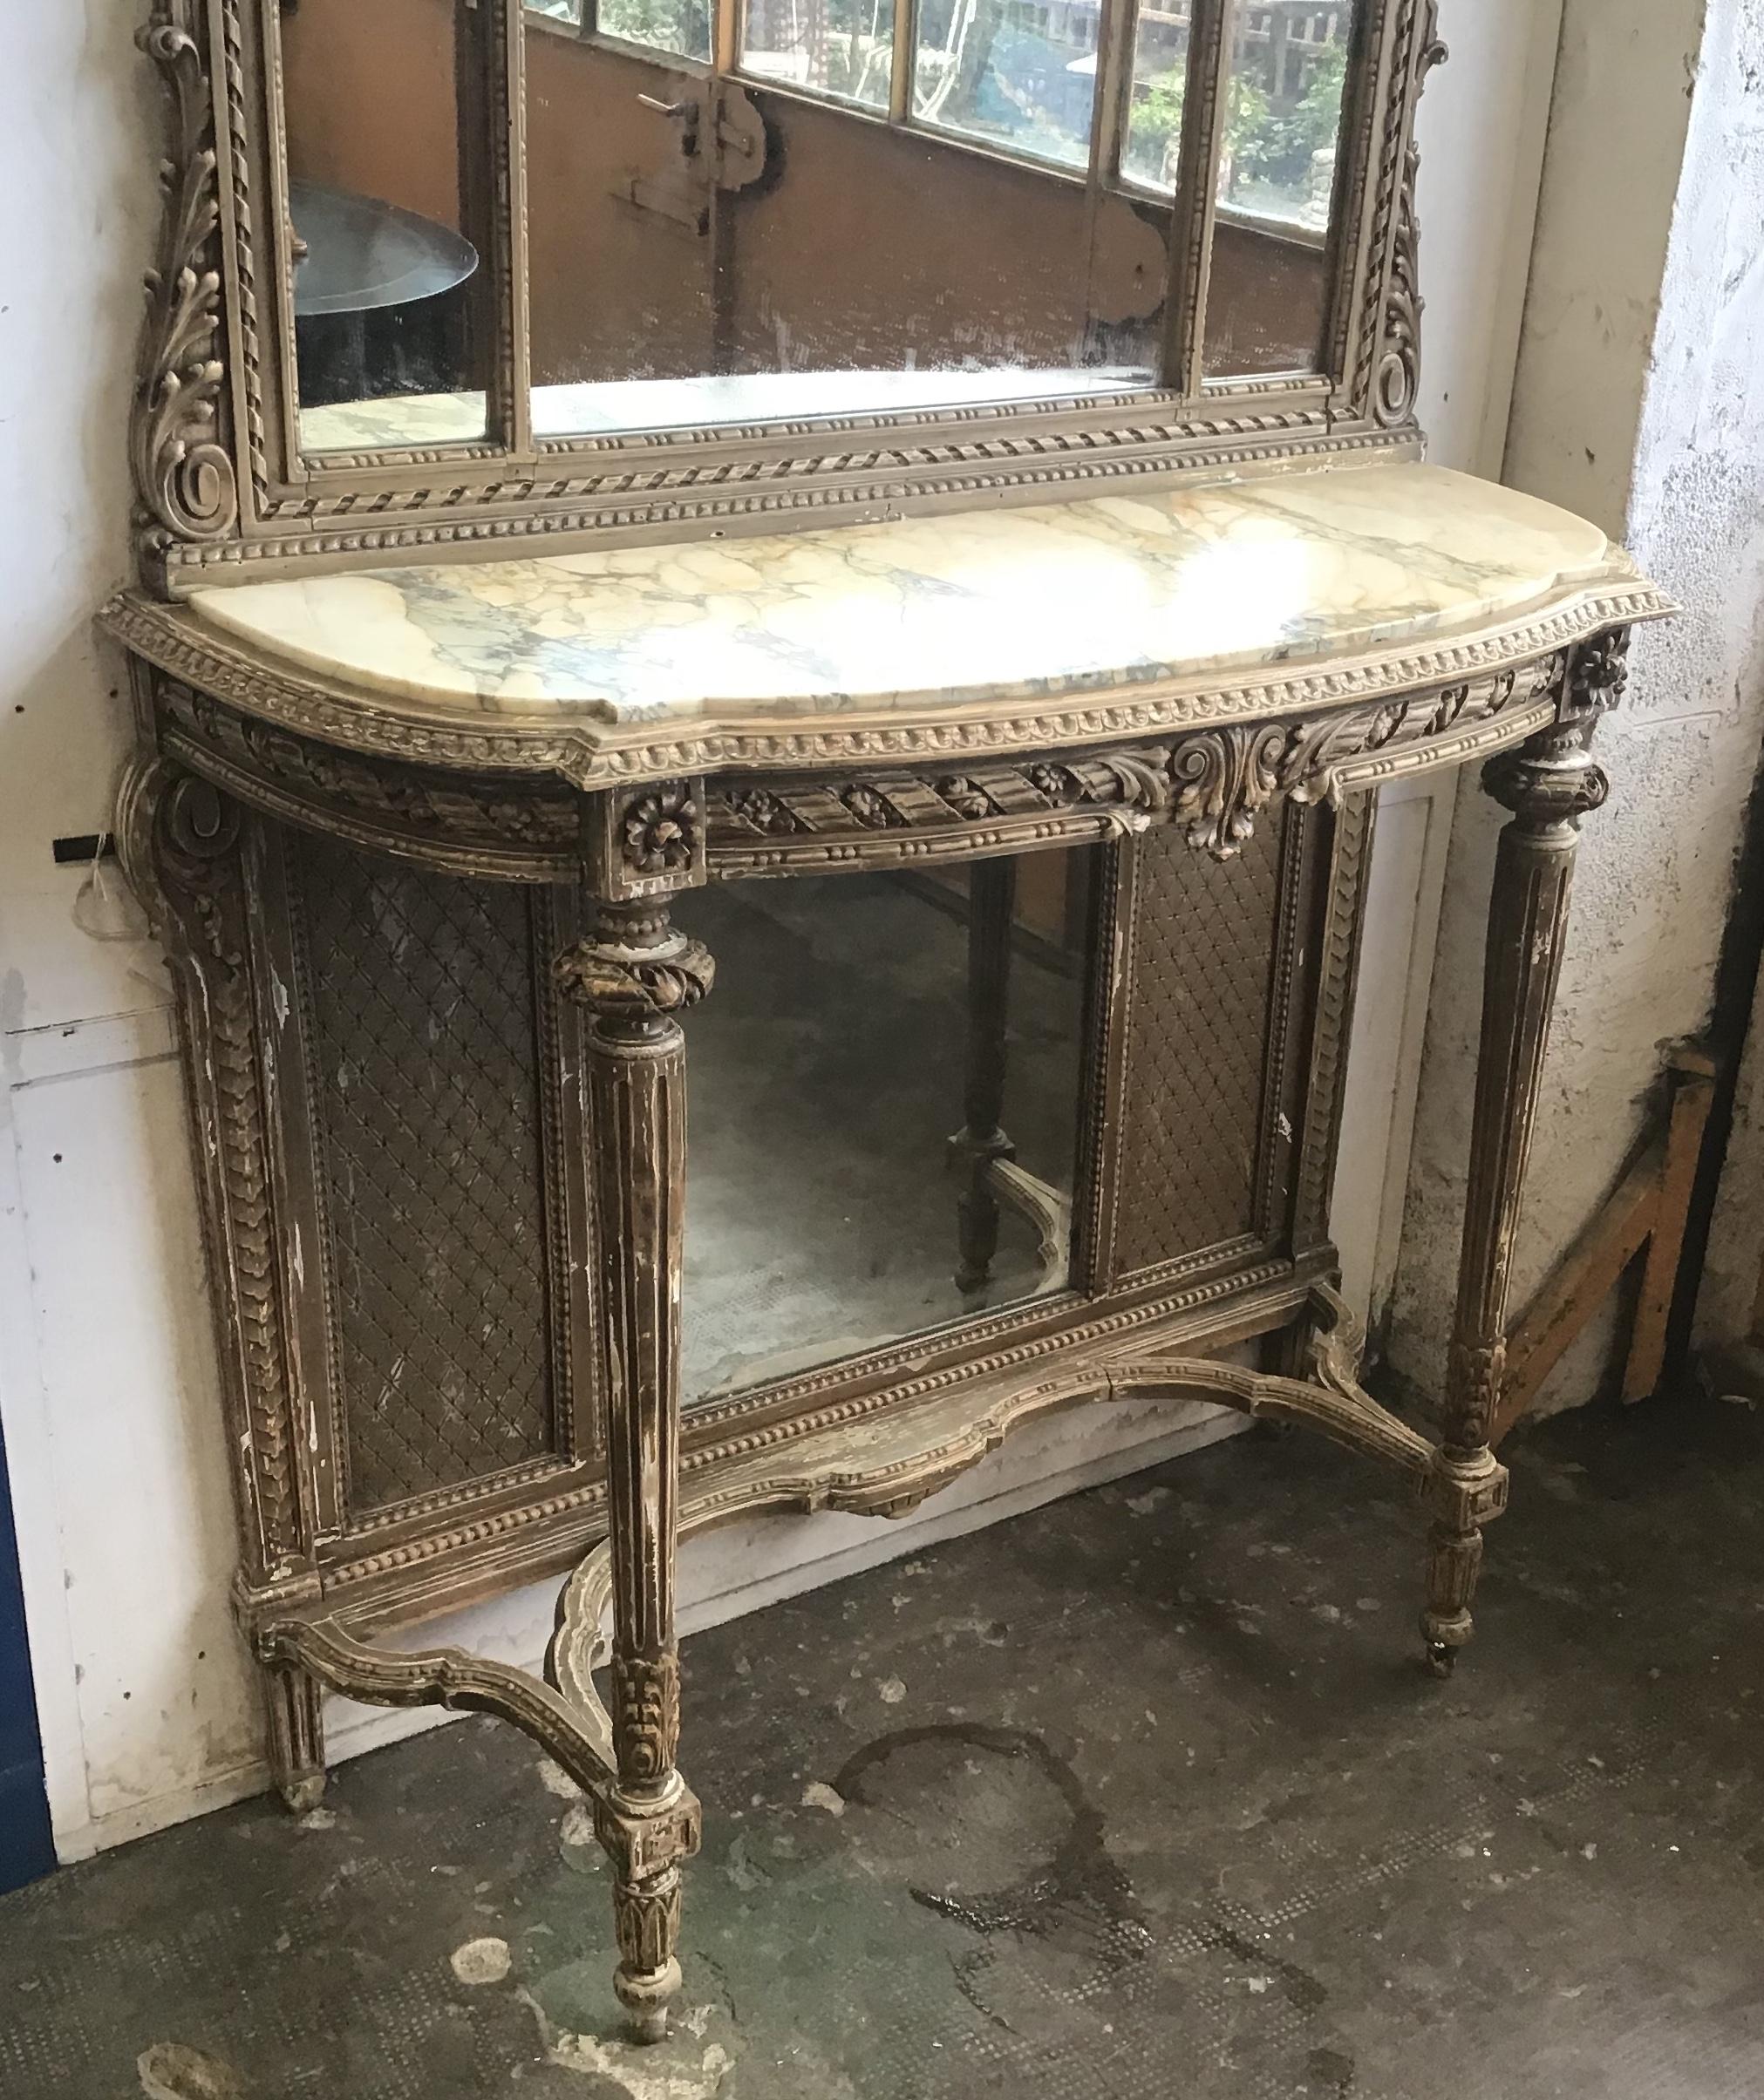 19th Century French Marble-Top Console with Giltwood Framed Mirror from 1890s im Zustand „Gut“ in Florence, IT